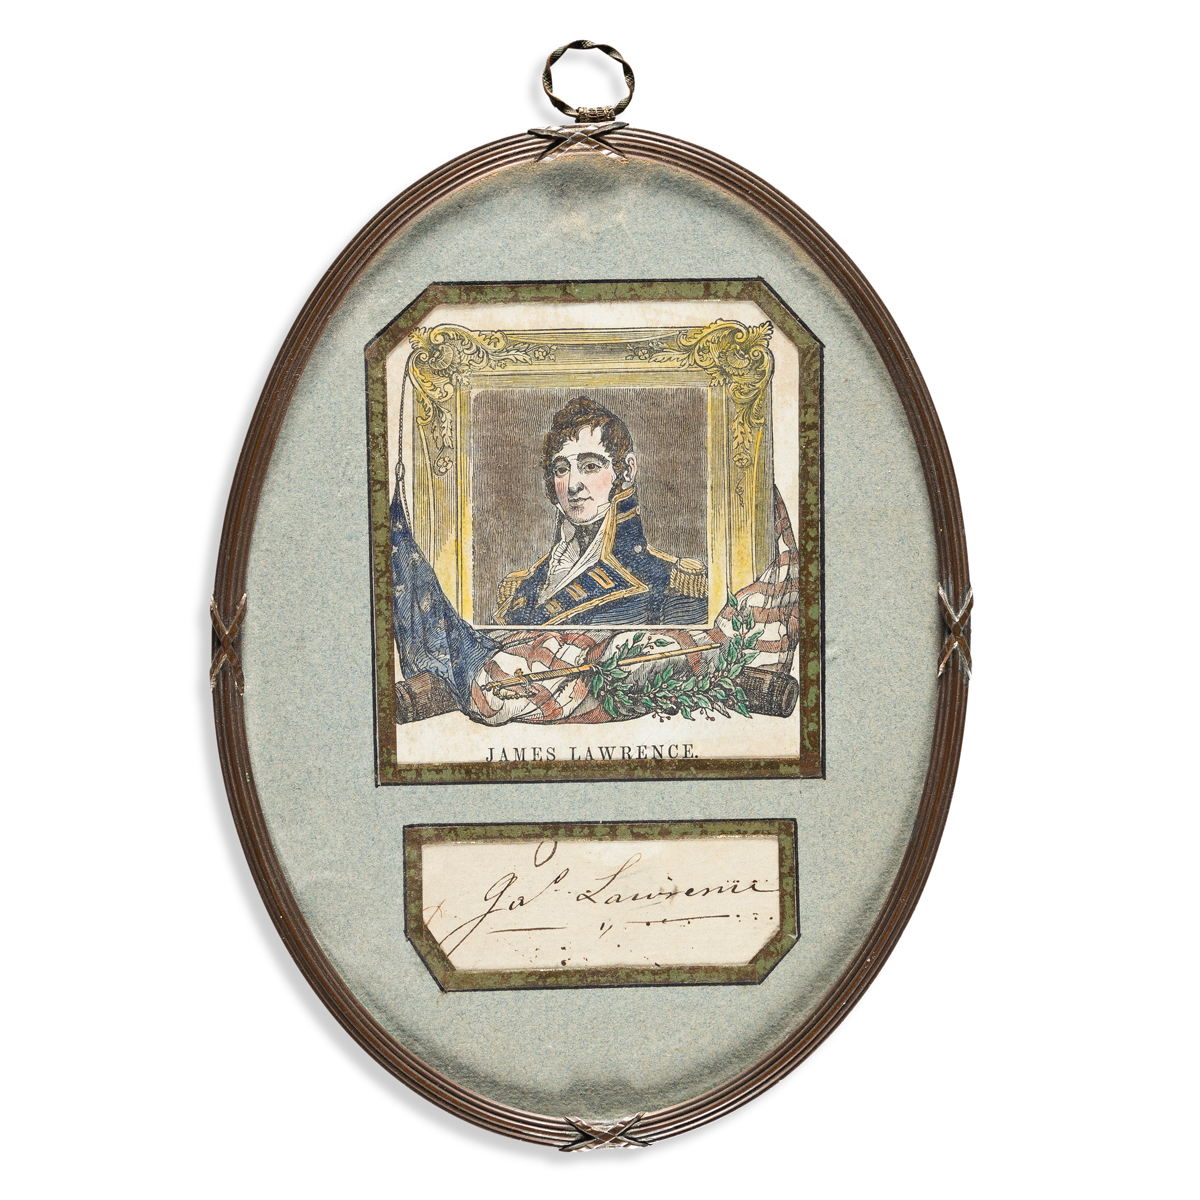 (WAR OF 1812.) Cut signatures of naval heroes Oliver Hazard Perry and James Lawrence in matching frames.